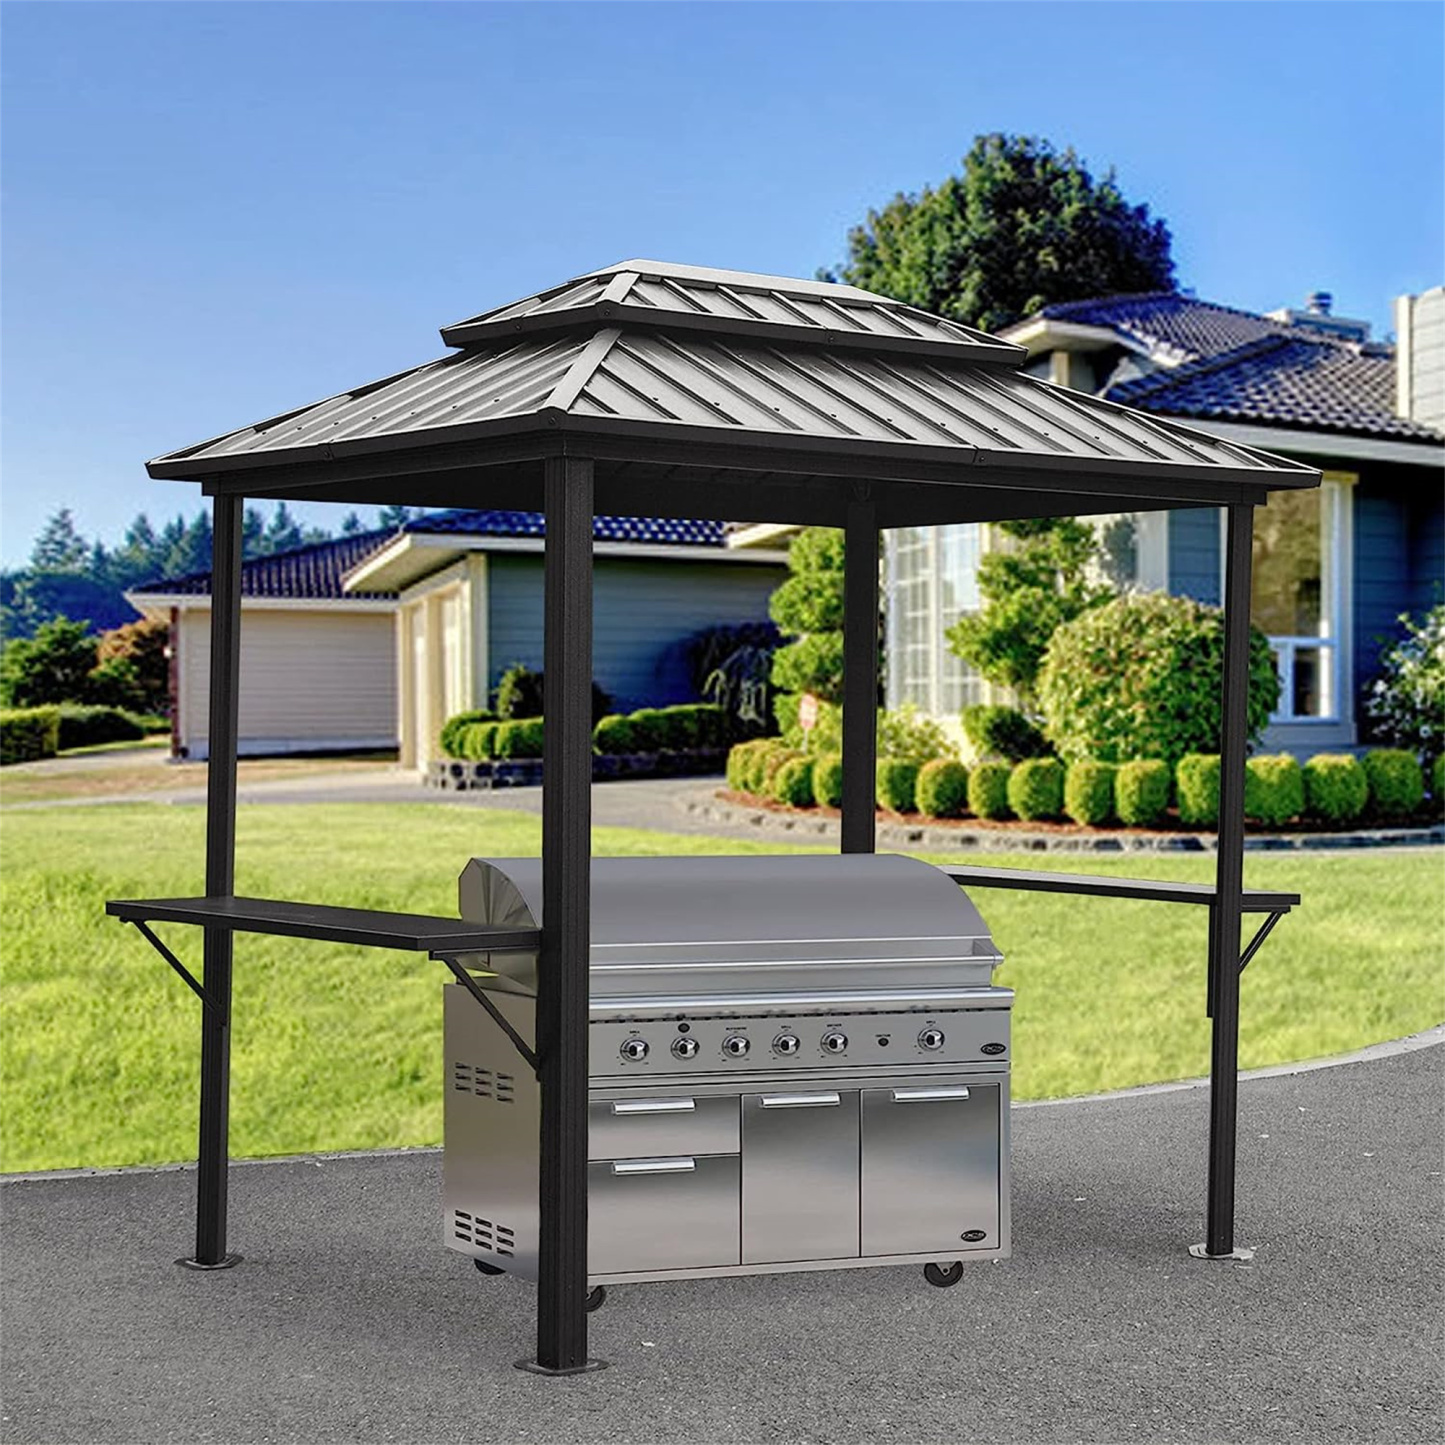 Mondawe Outdoor 8 × 6 Ft Aluminum Frame BBQ Grill Permanent Double Roof Hardtop Gazebo with Shelves Serving Tables for Patio Lawn Deck Backyard and Garden